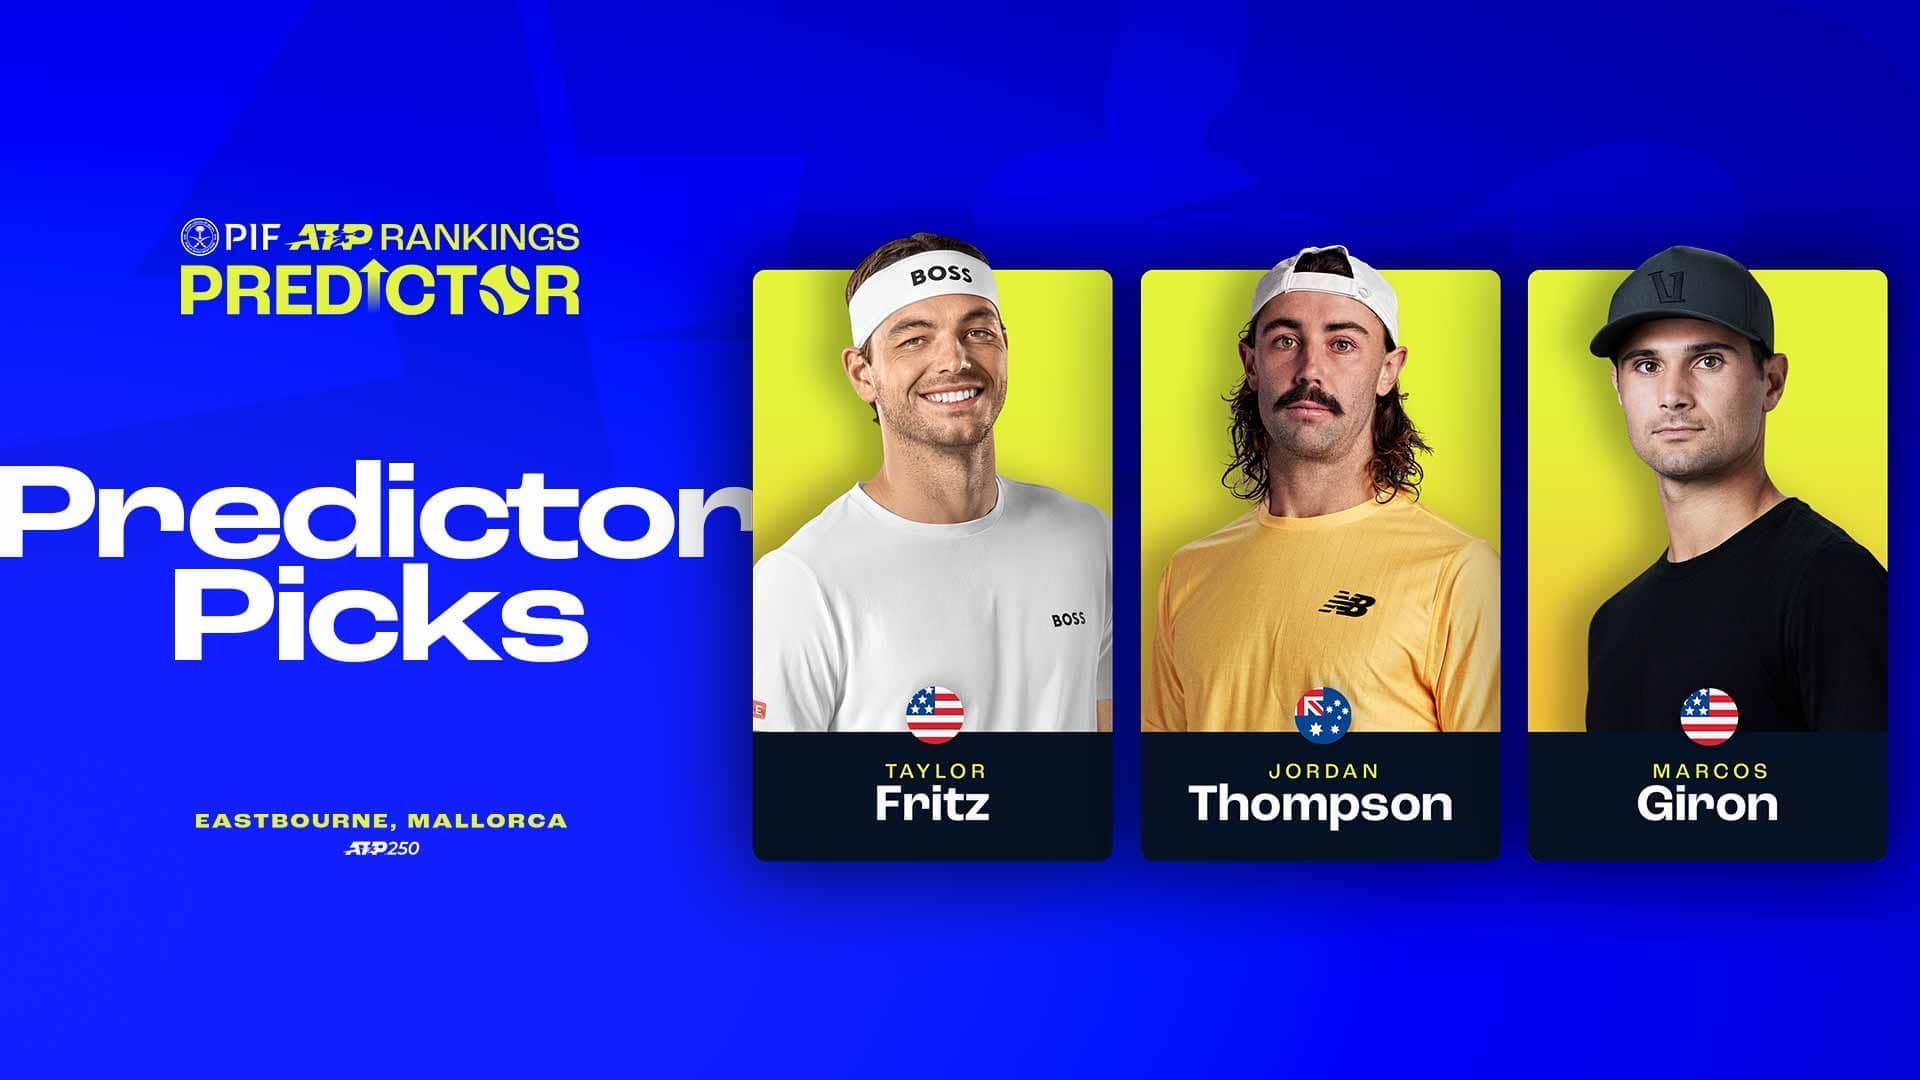 Taylor Fritz, Jordan Thompson and Marcos Giron are among the stars competing this week.